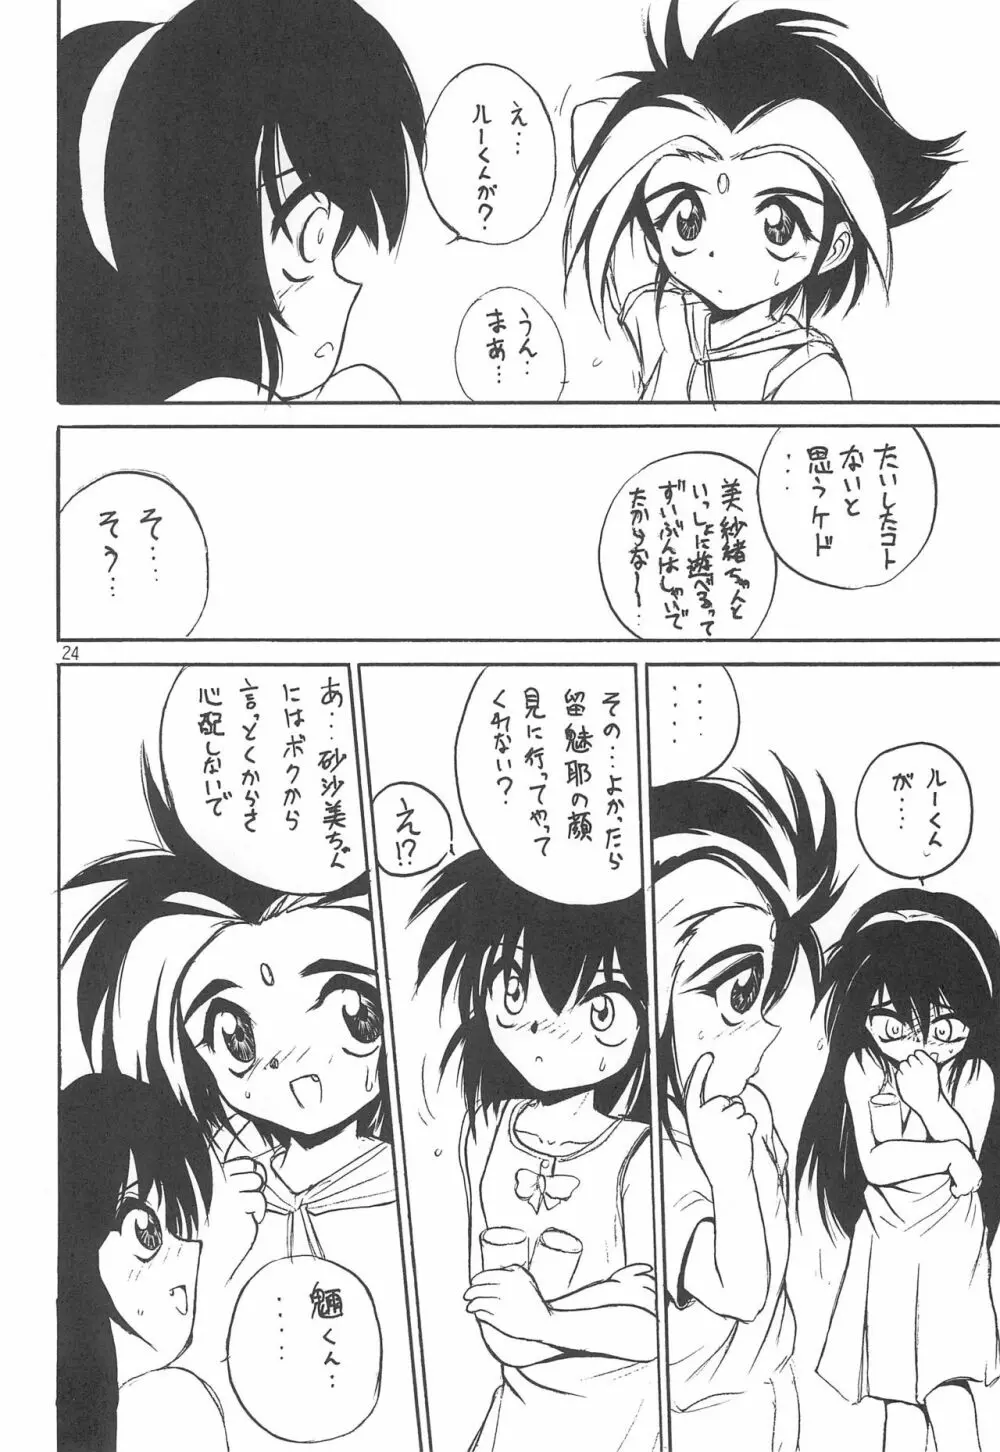 With Page.24